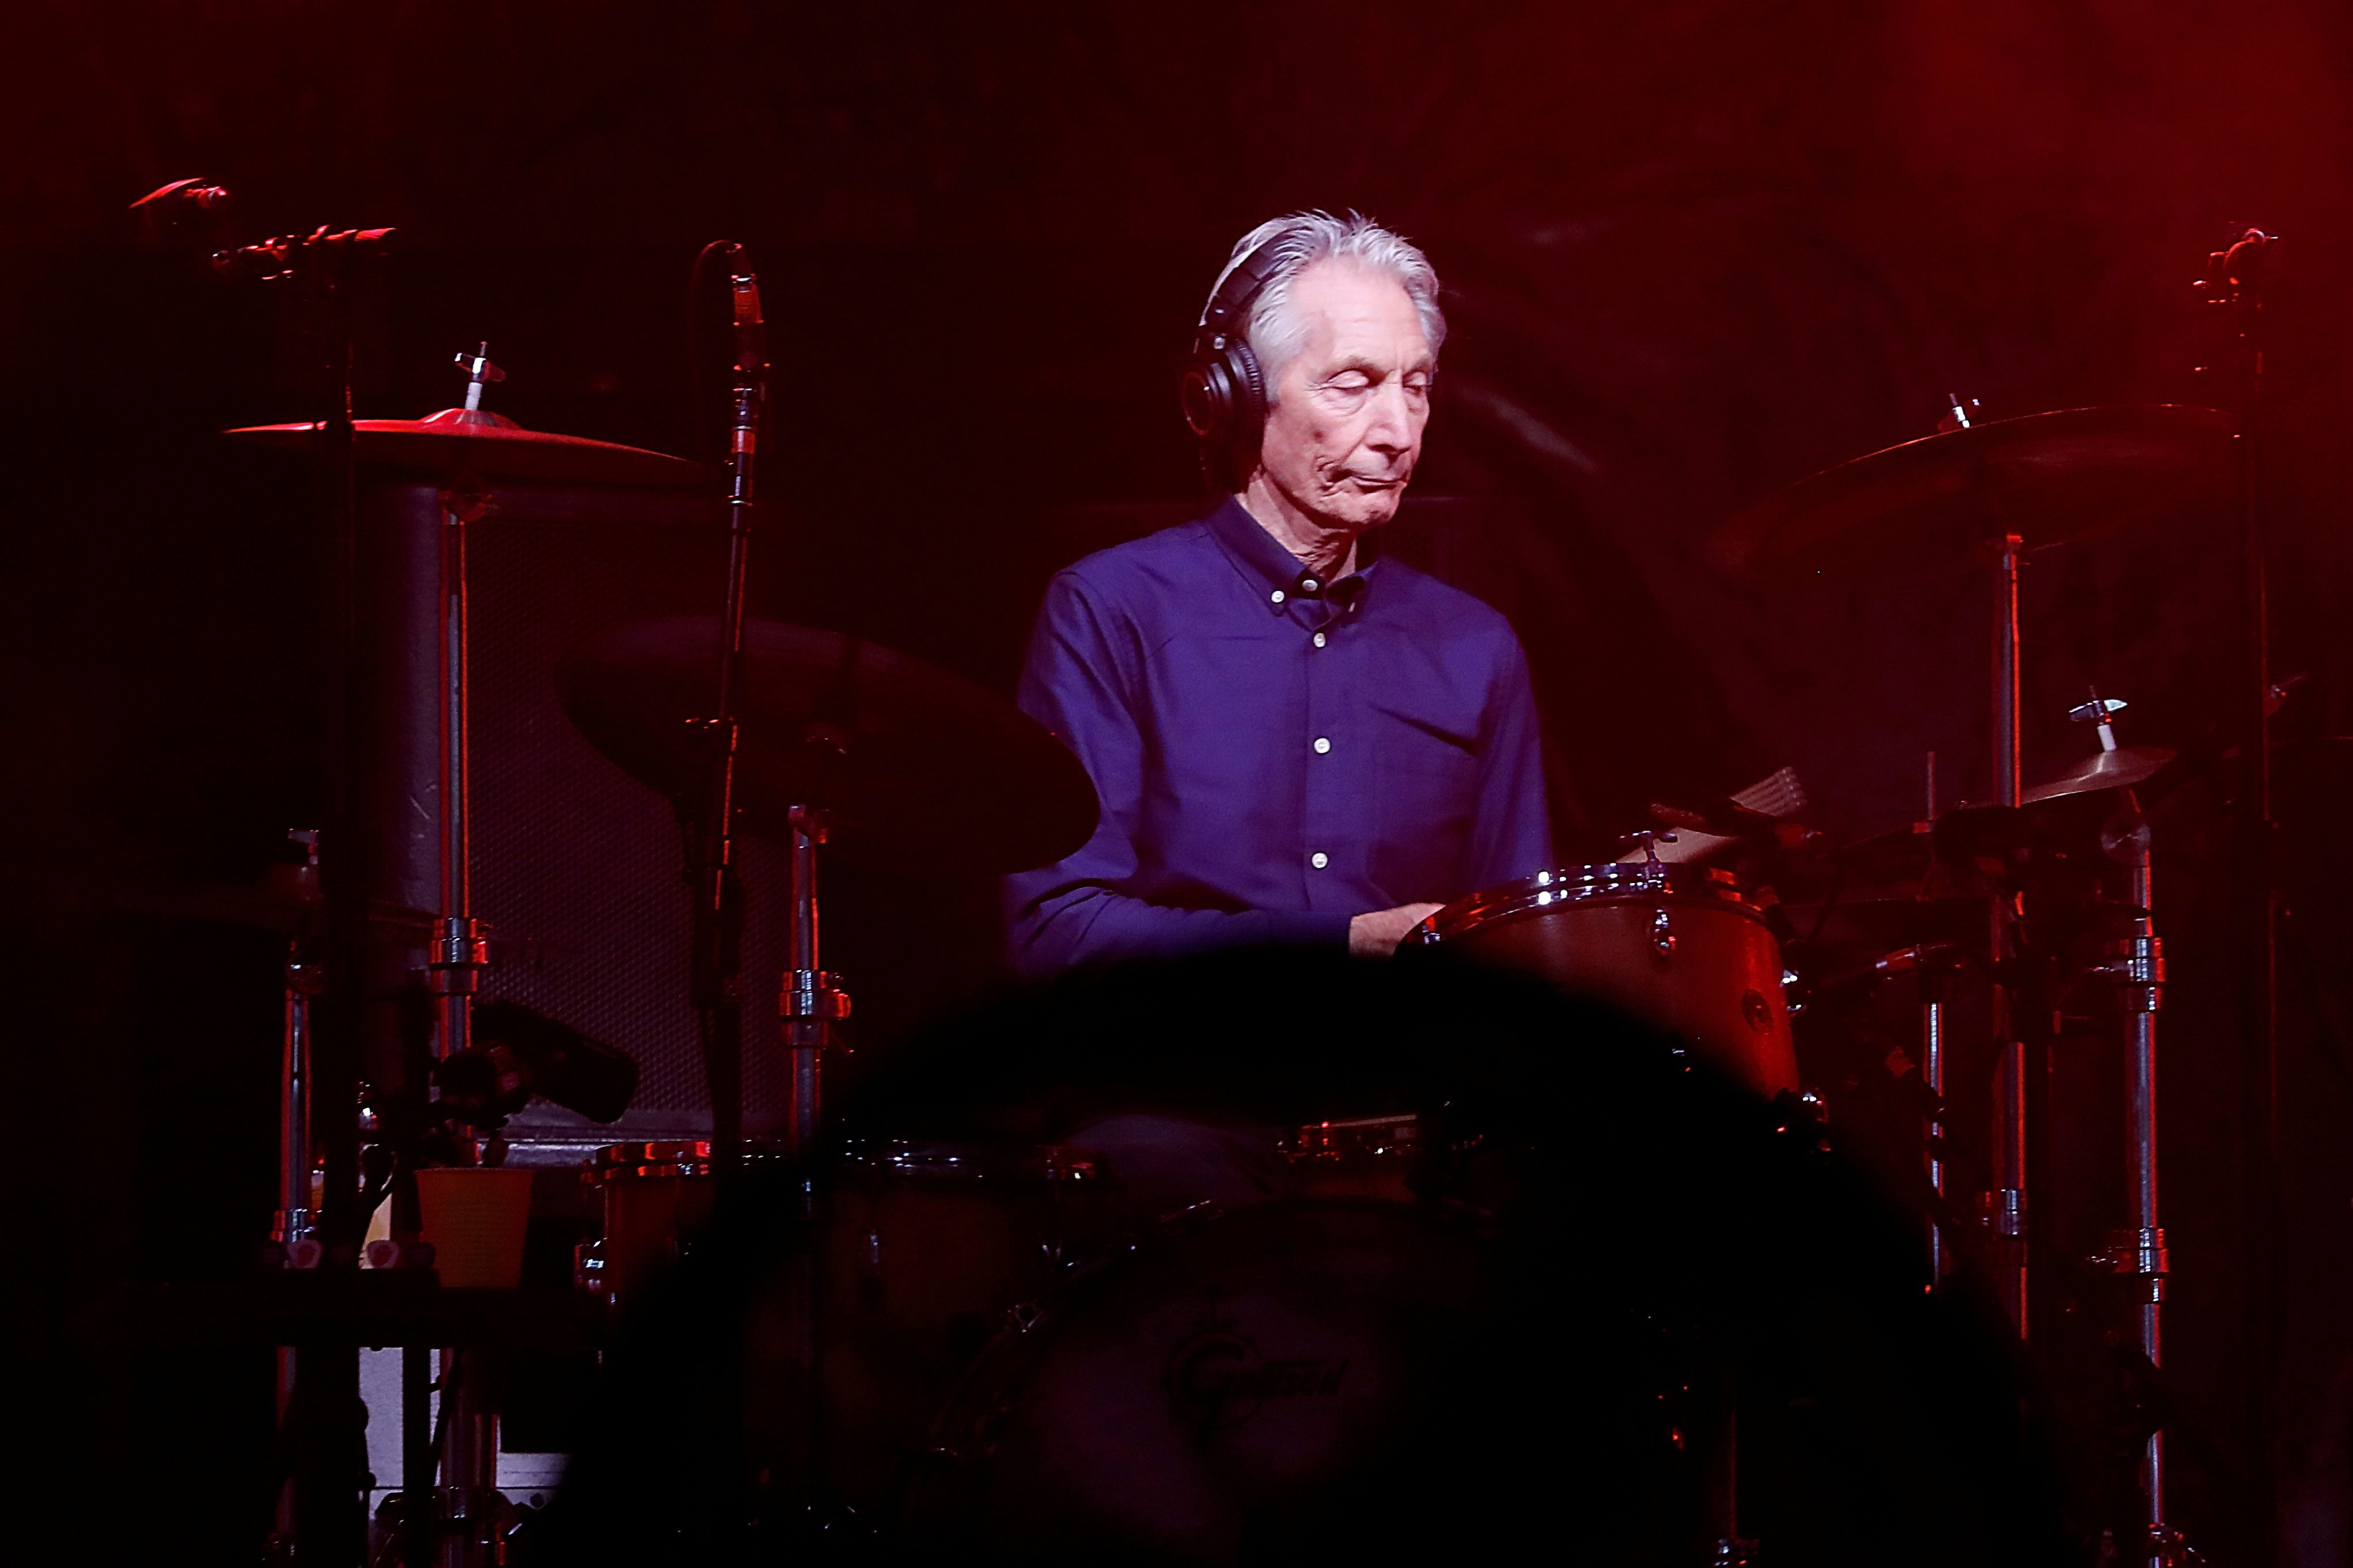 Rolling Stones drummer Charlie Watts dies after tour pullout